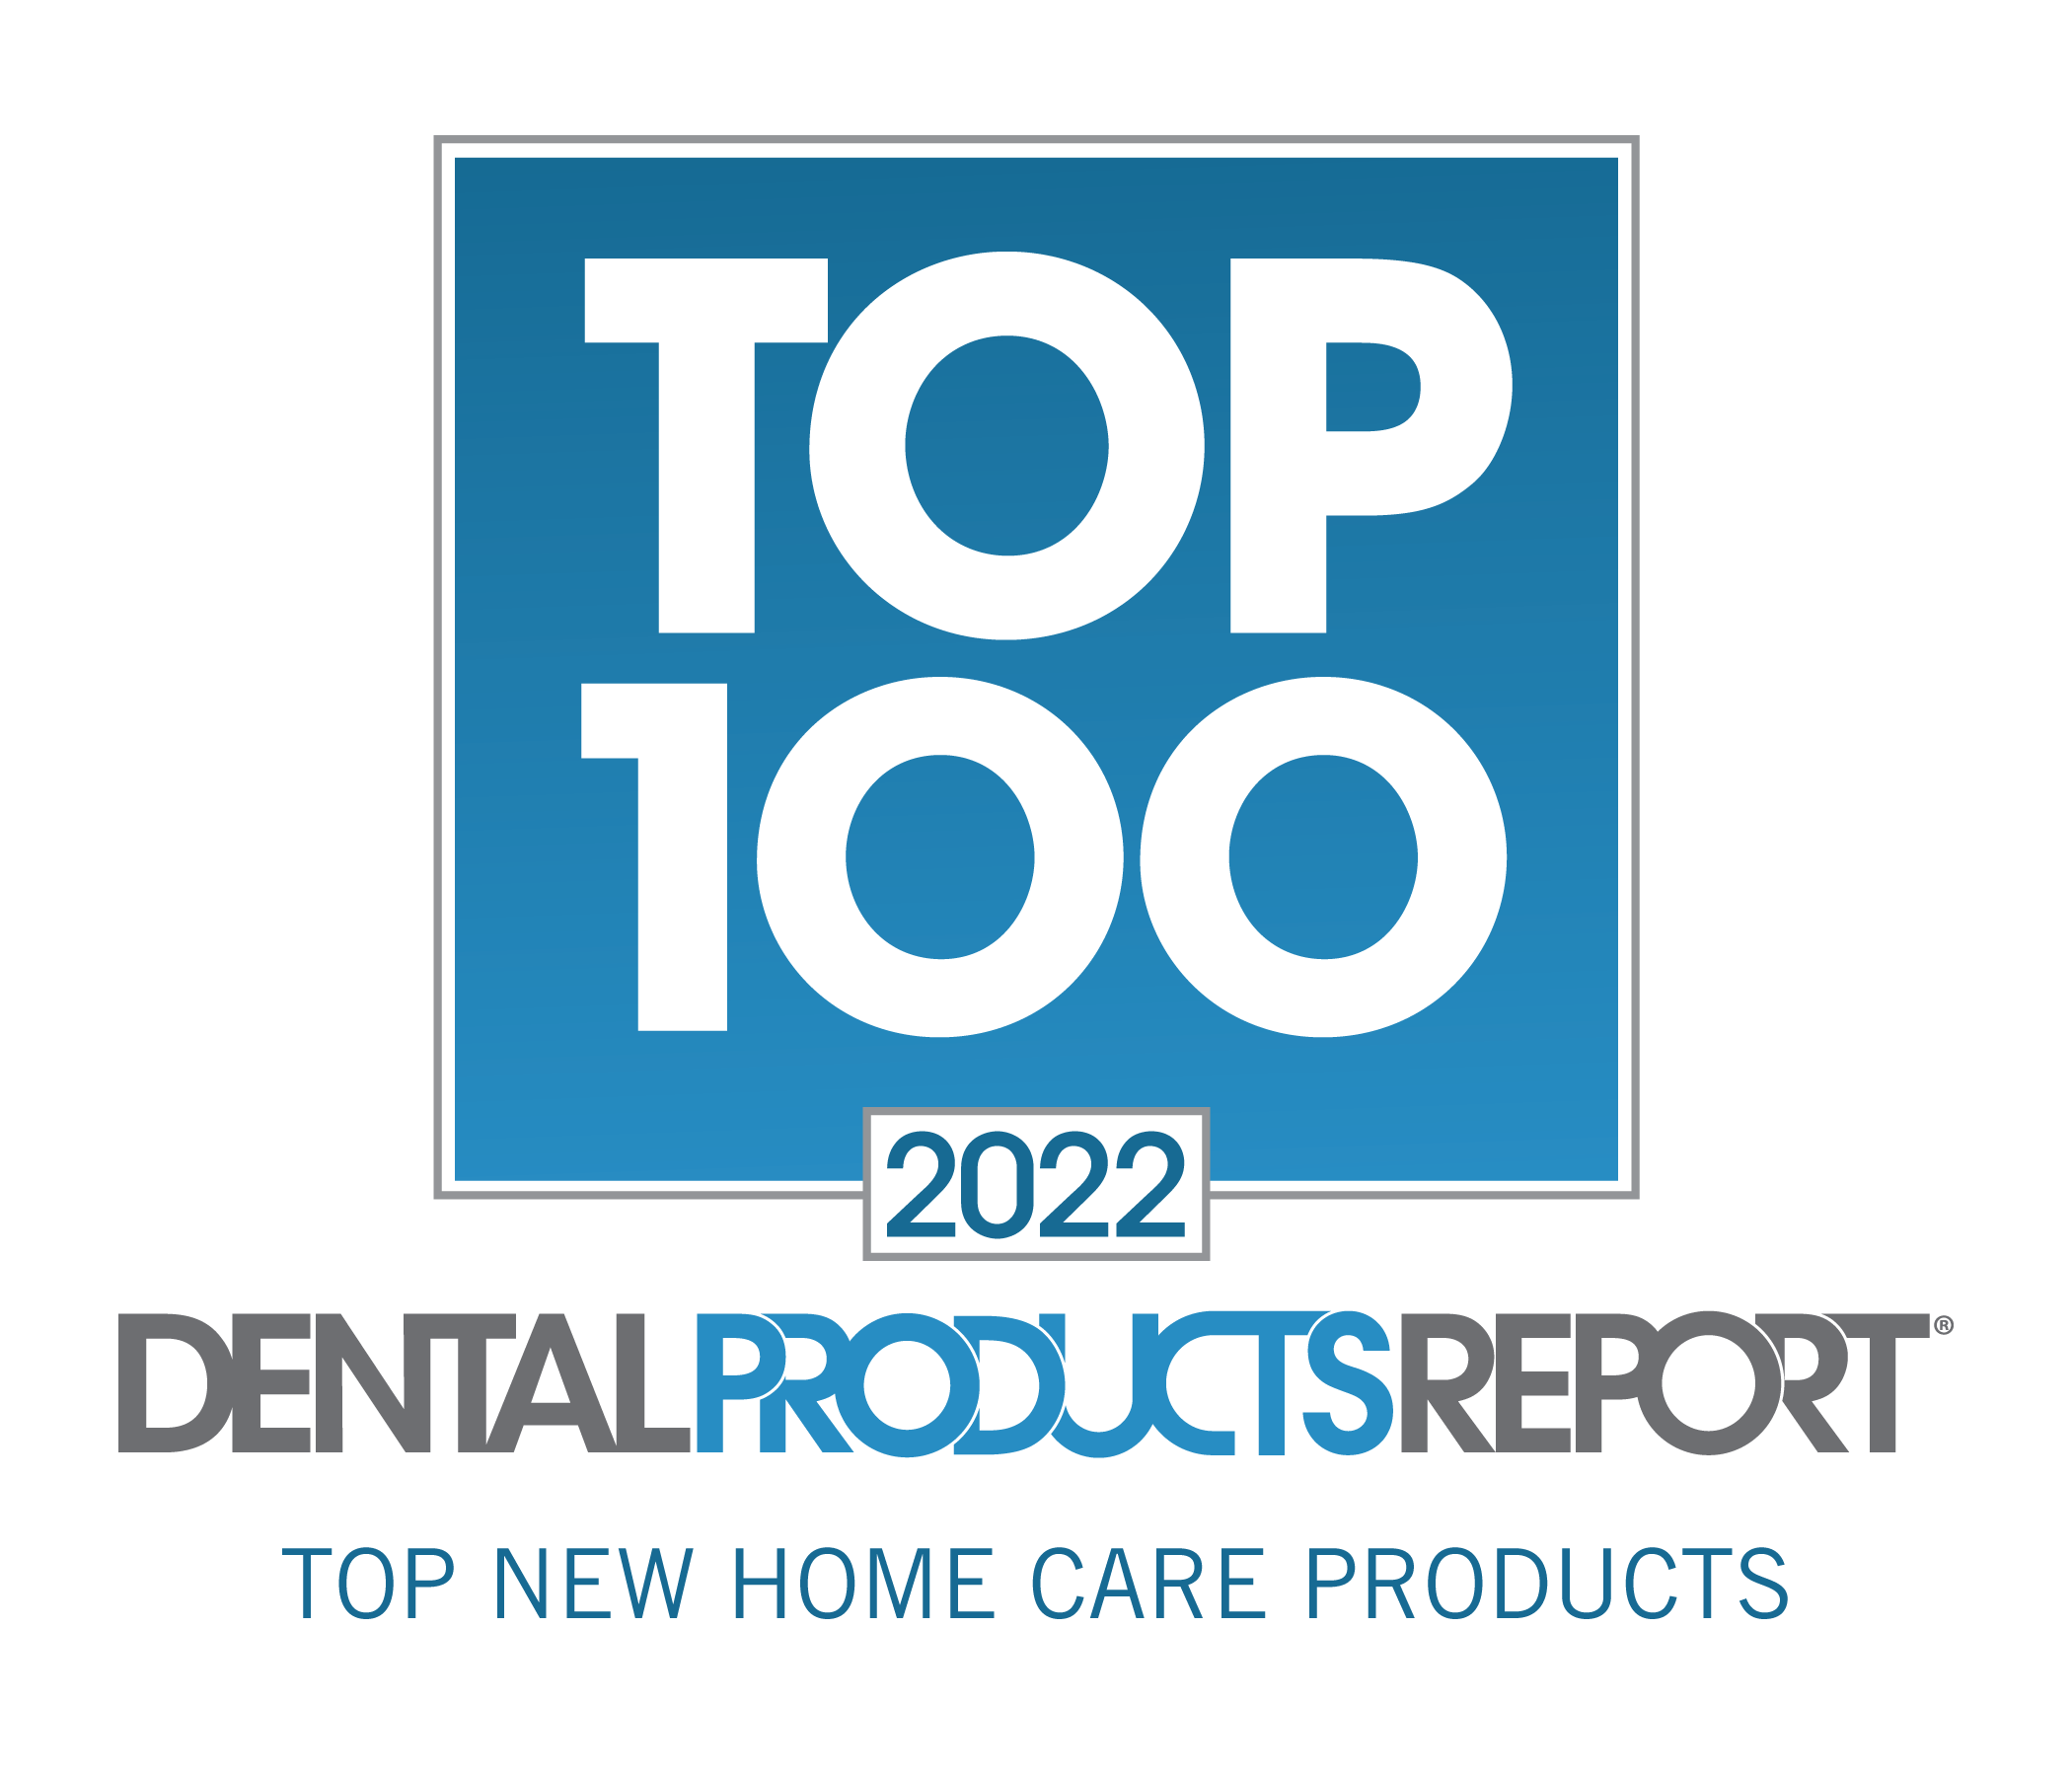 Top 10 Home Care Products of 2022